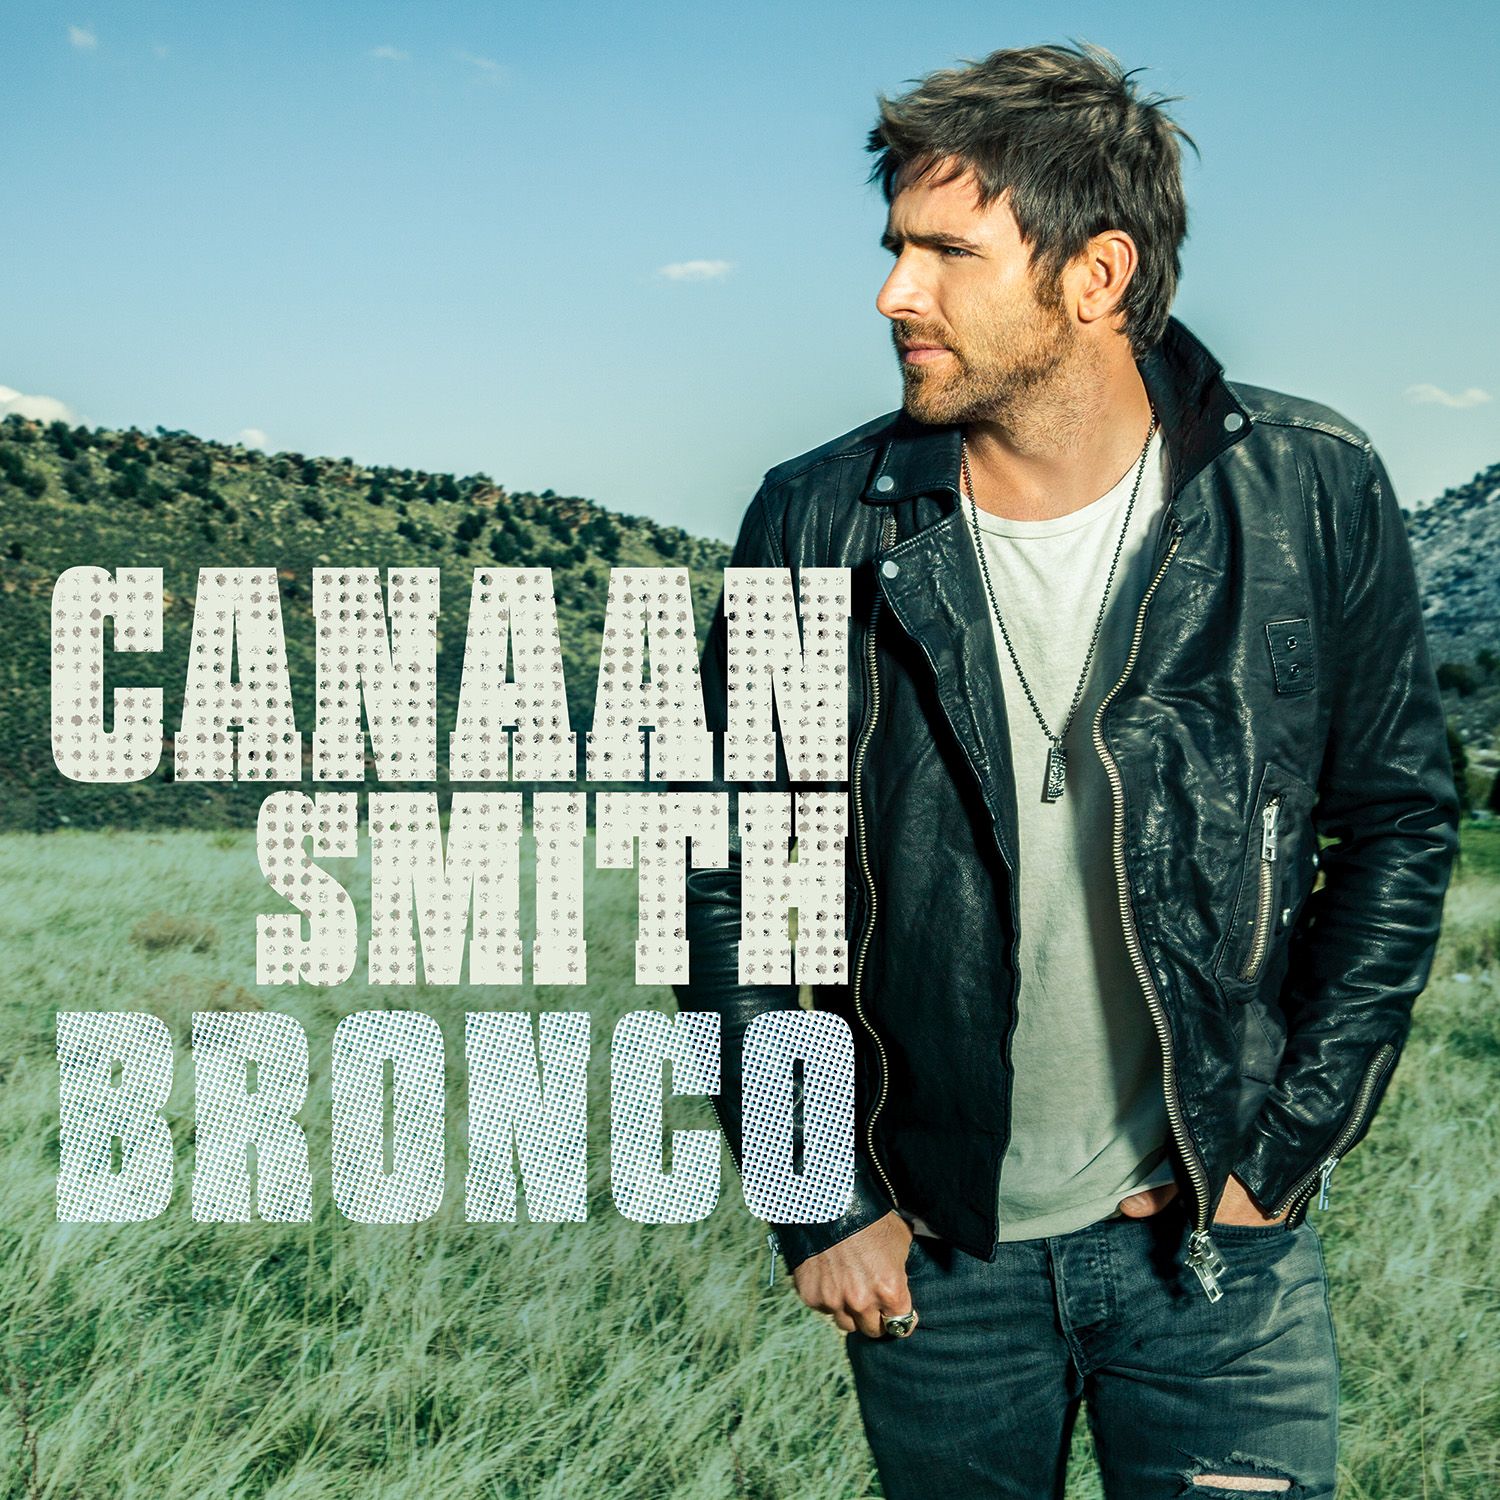 CANAAN SMITH’S “LOVE YOU LIKE THAT” CERTIFIED GOLD